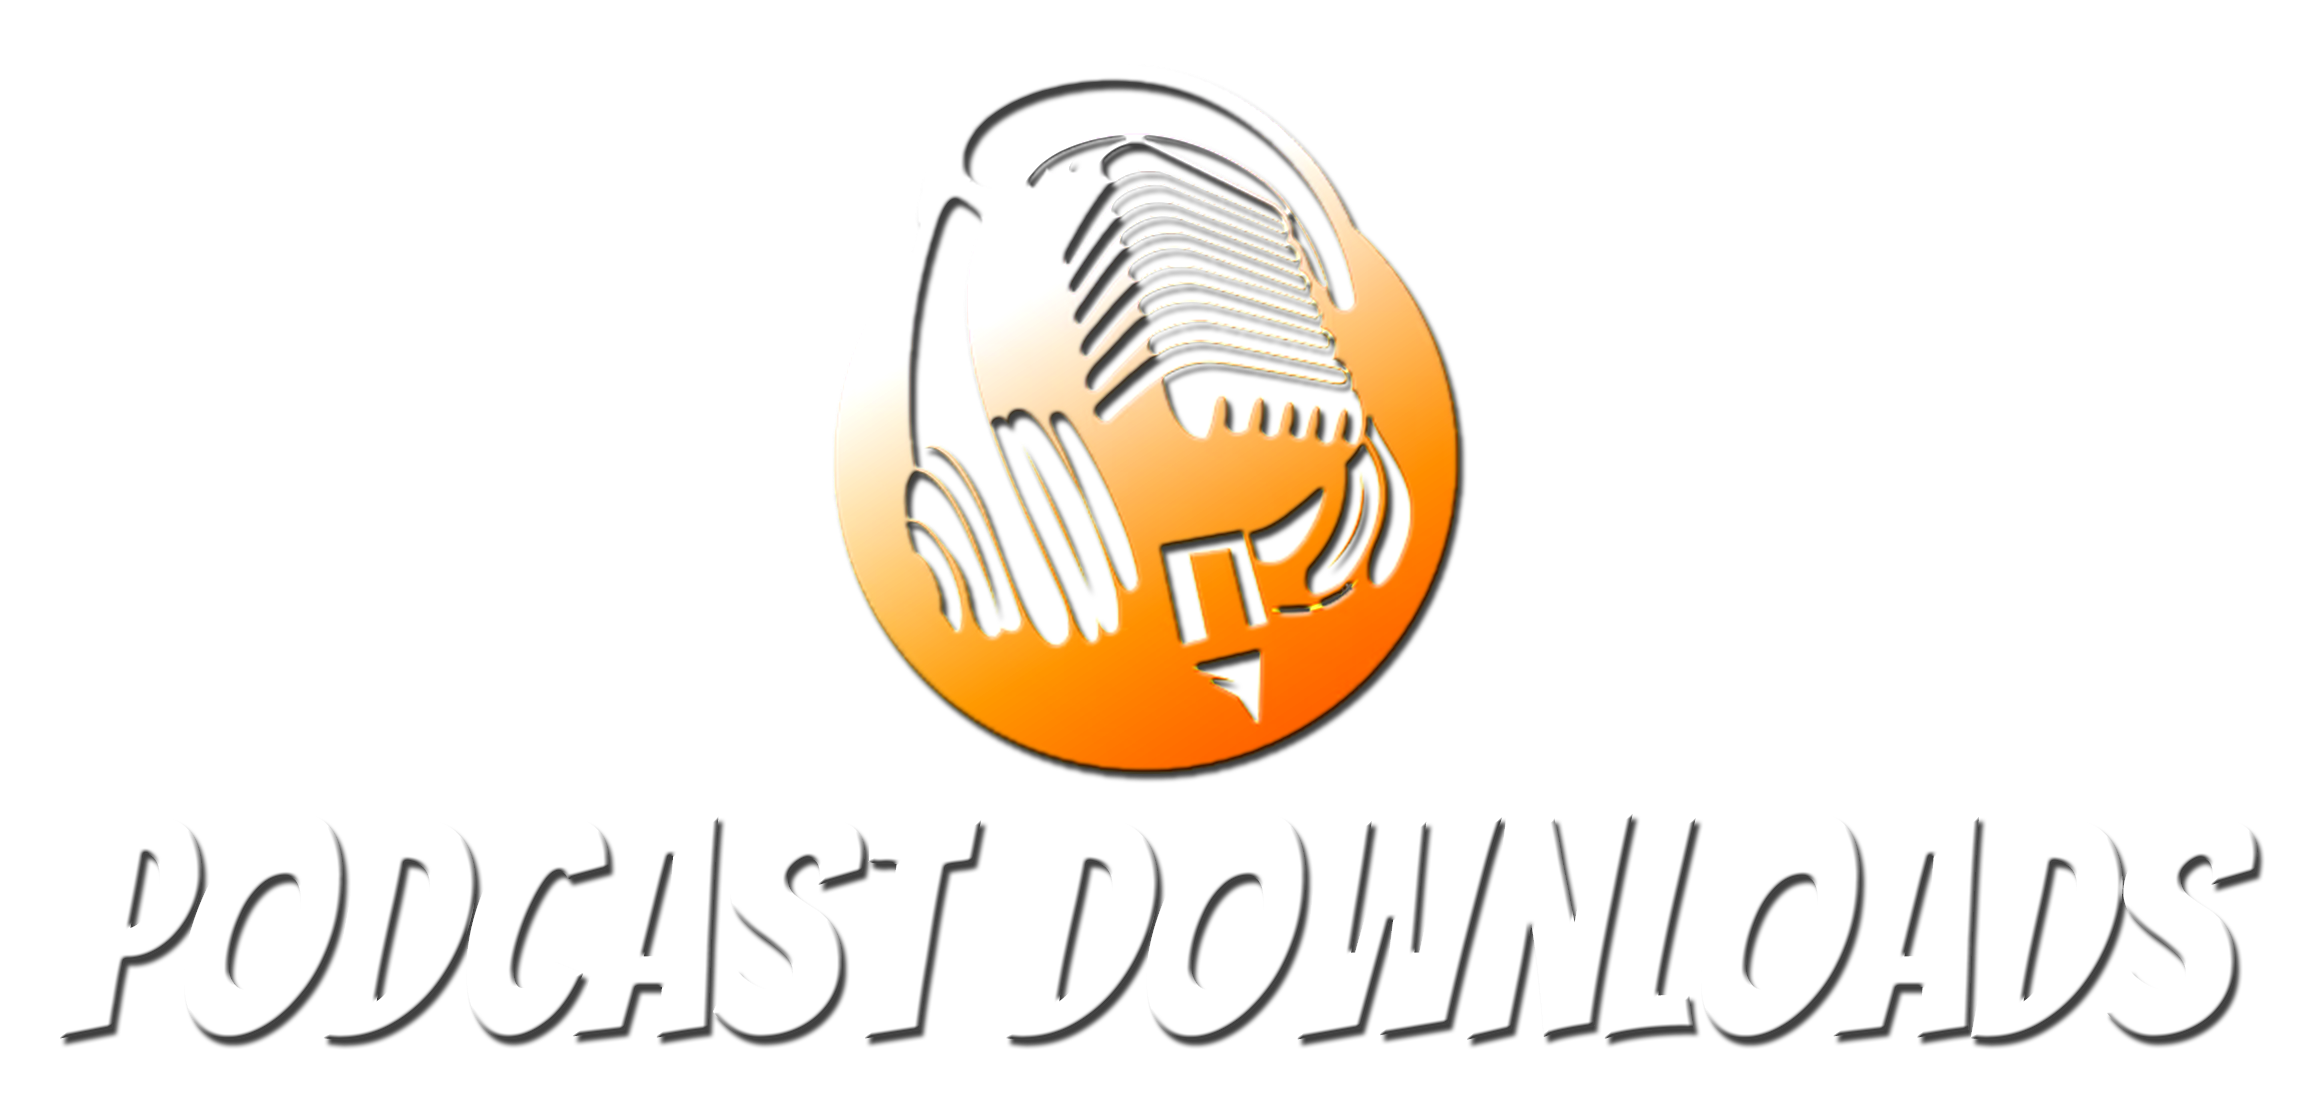 Podcast Downloads